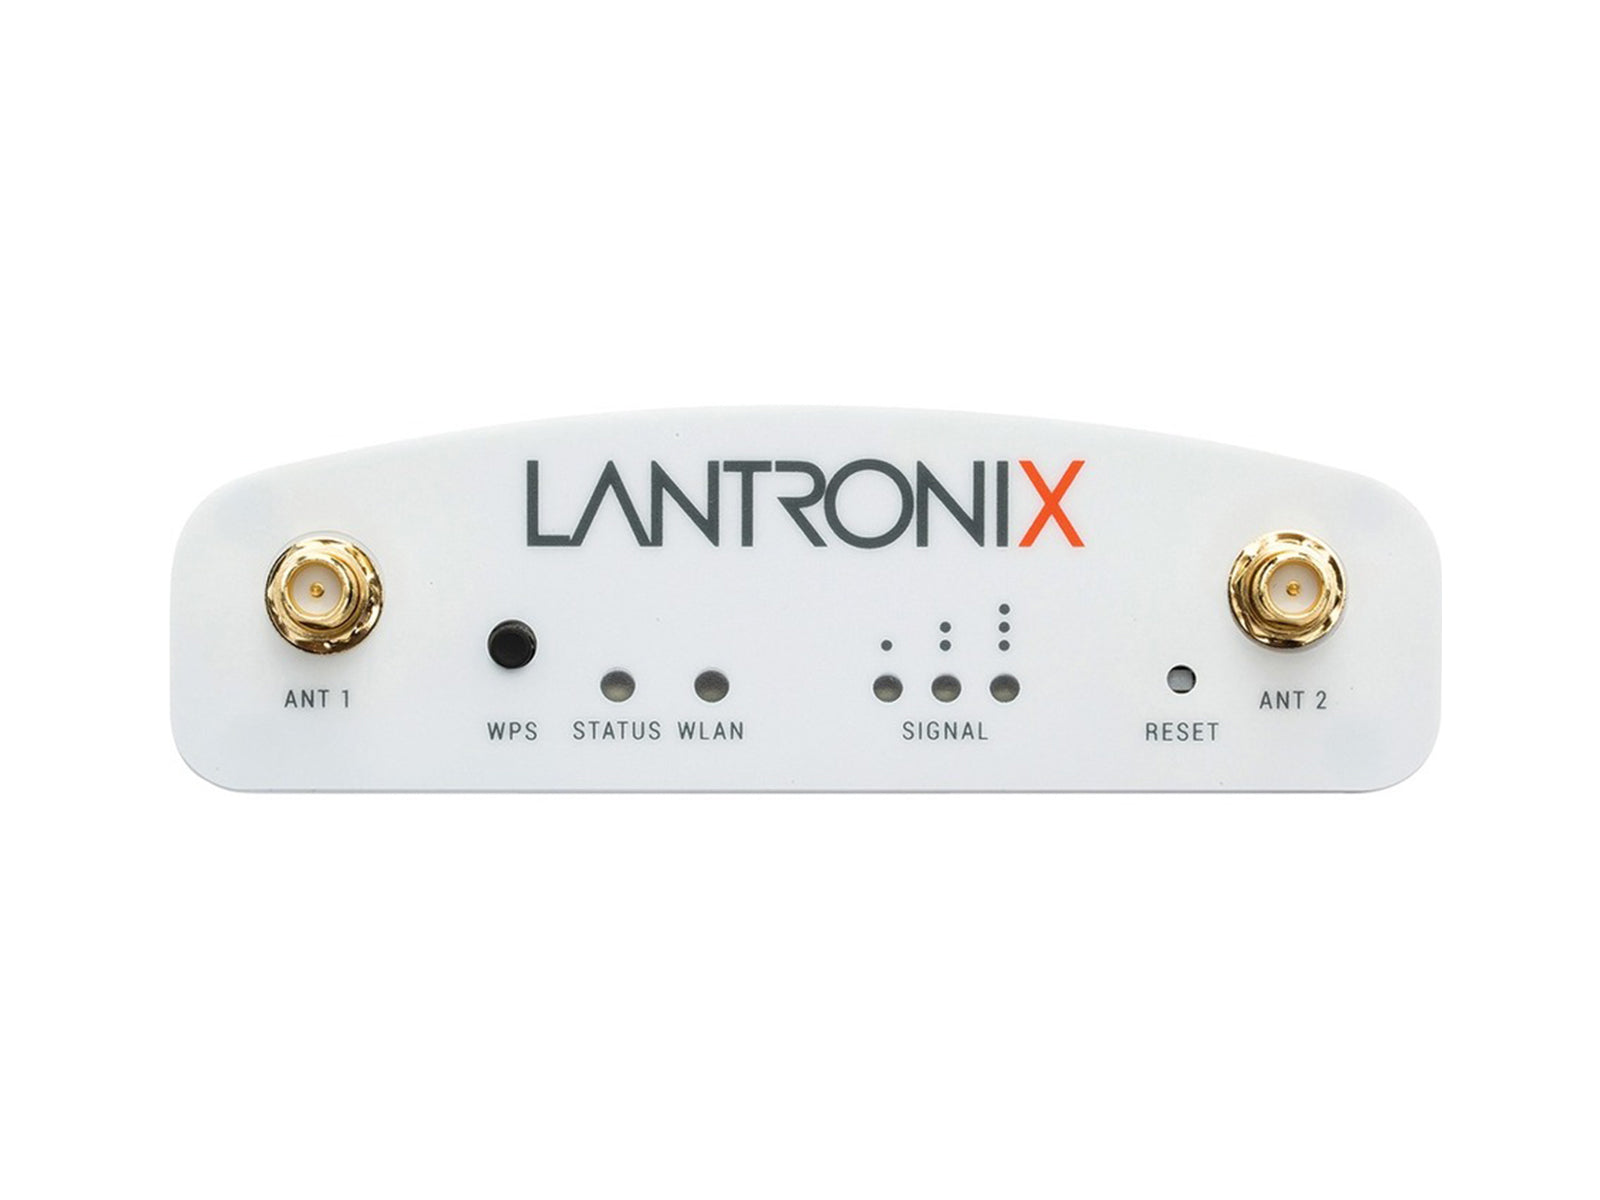 Lantronix SGX 5150 Device Gateway Router Dual Band Wireless and Ethernet (SGX5150000US) Monitors.com 